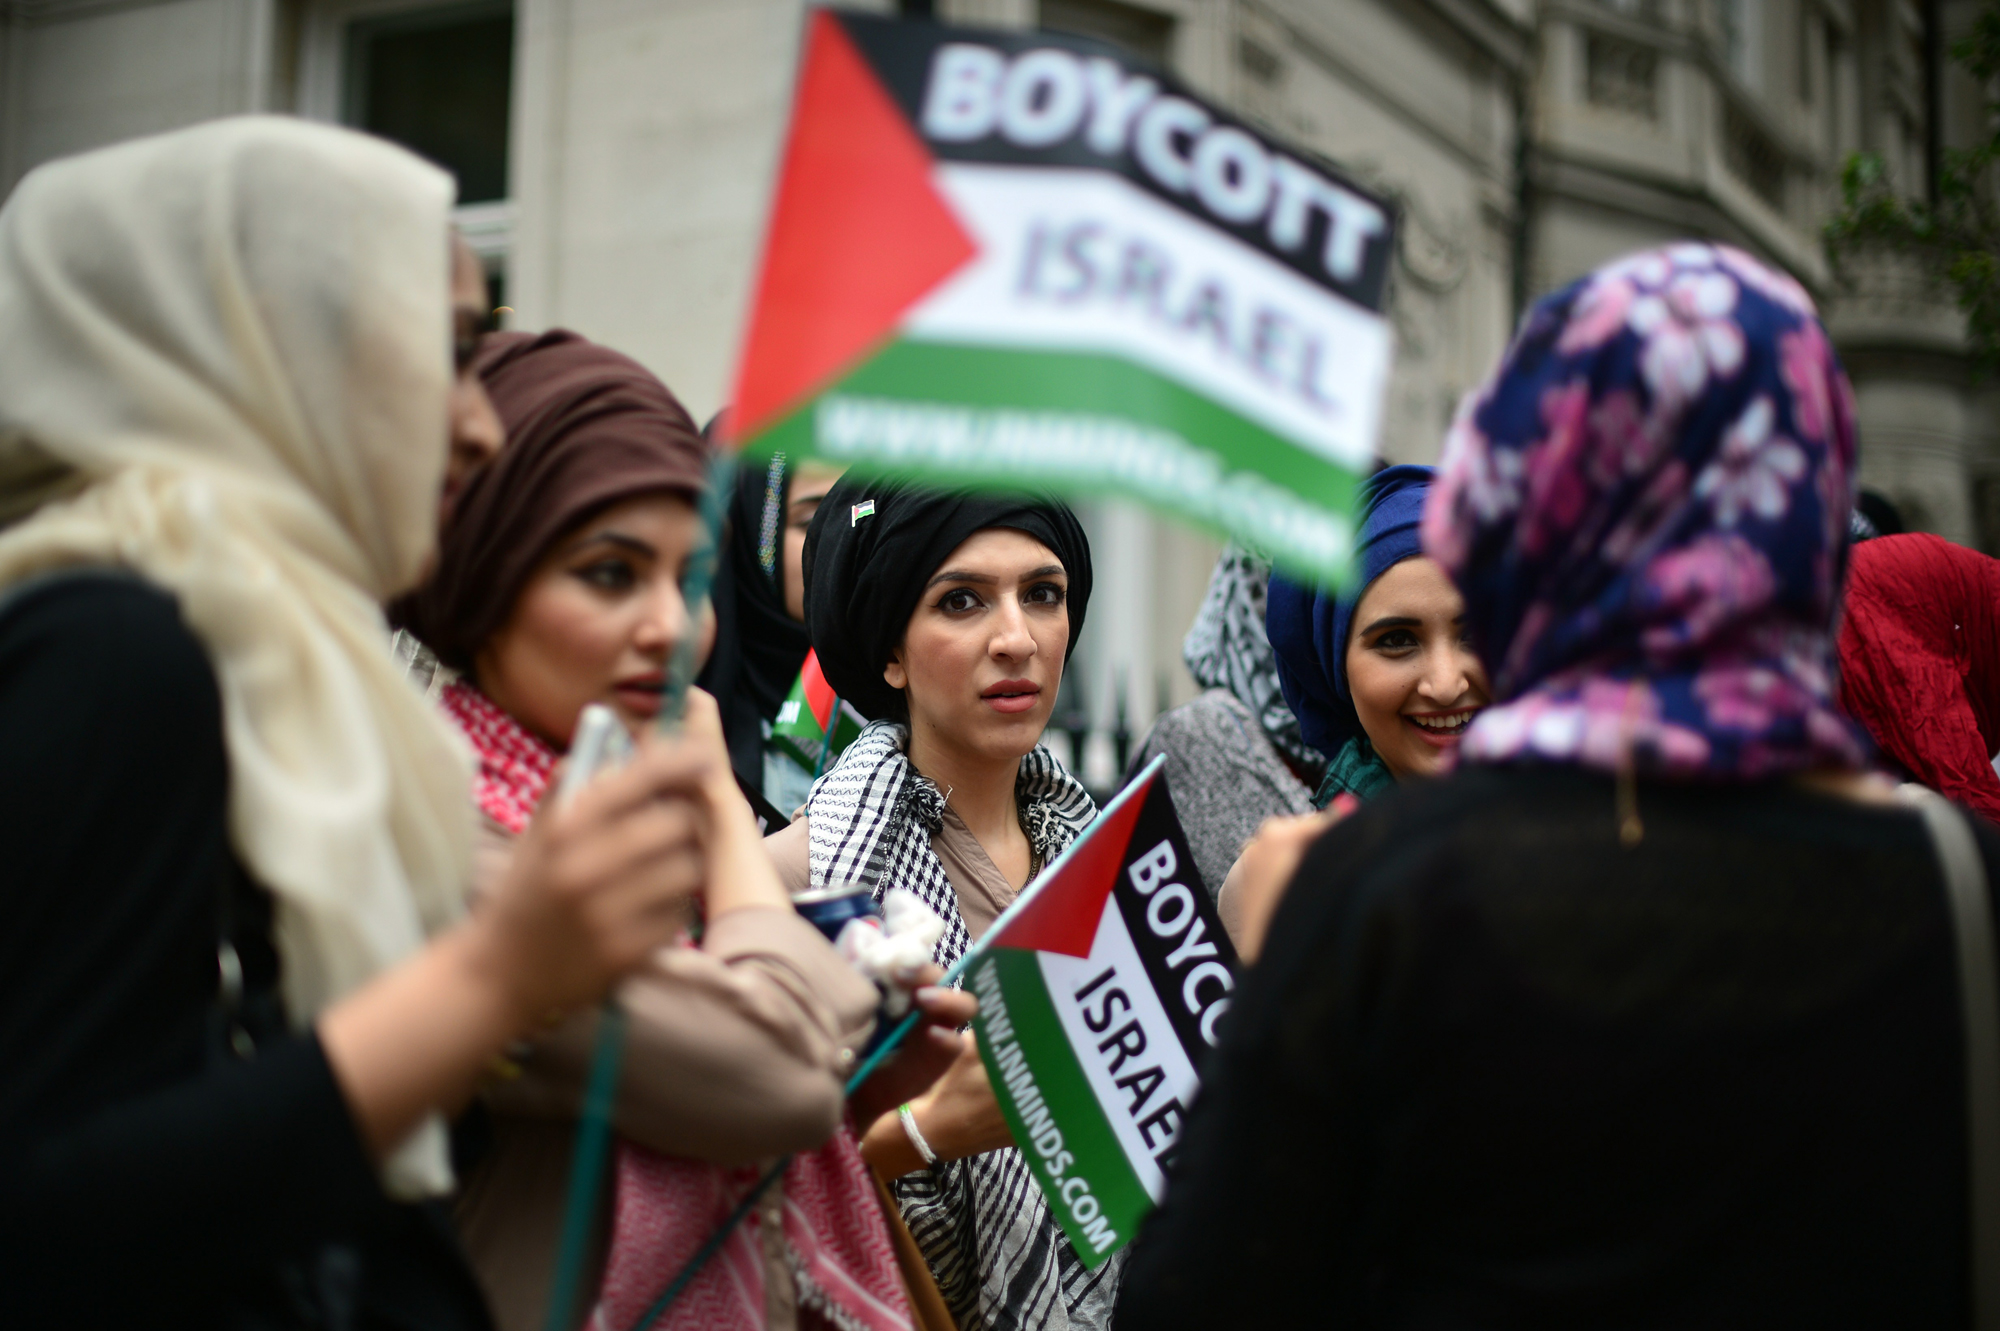 Protesters demonstrate against Israeli actions in Gaza, in central London on July 25, 2014.